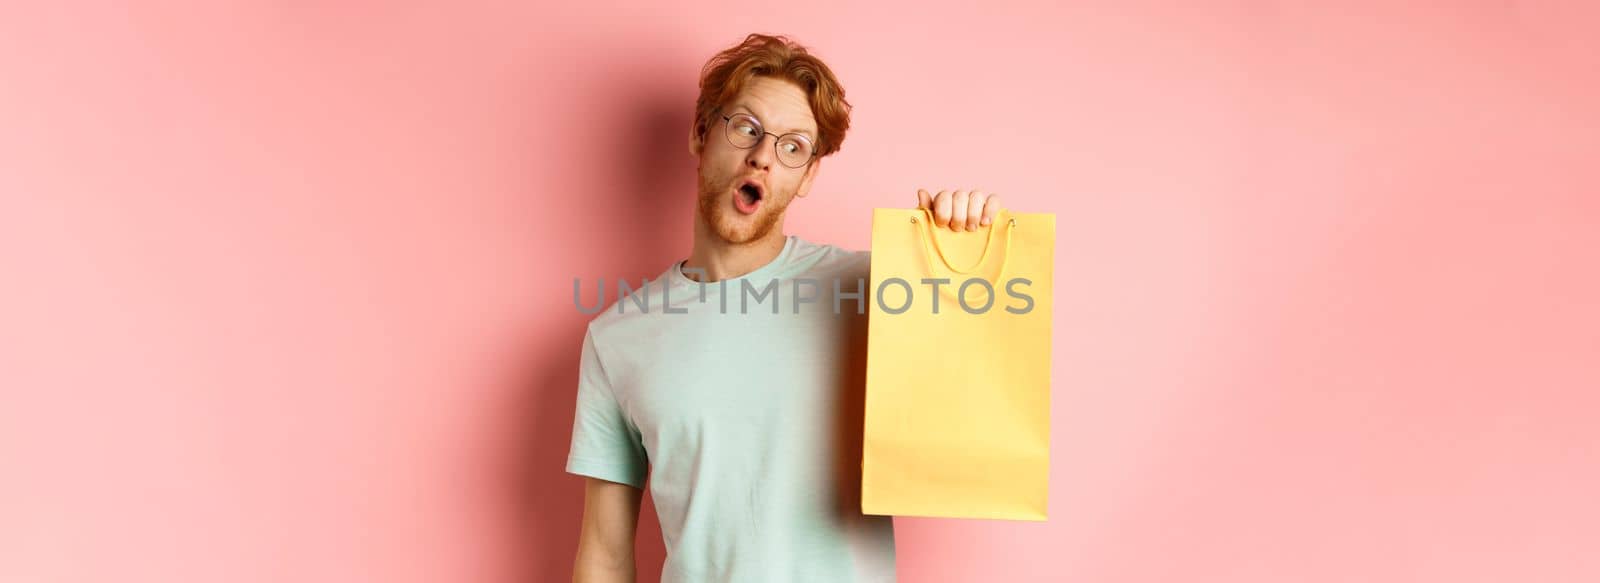 Funny handsome man with red hair, wearing glasses and t-shirt, holding and looking at yellow shopping bag, buying gifts during promo offer, standing over pink background.